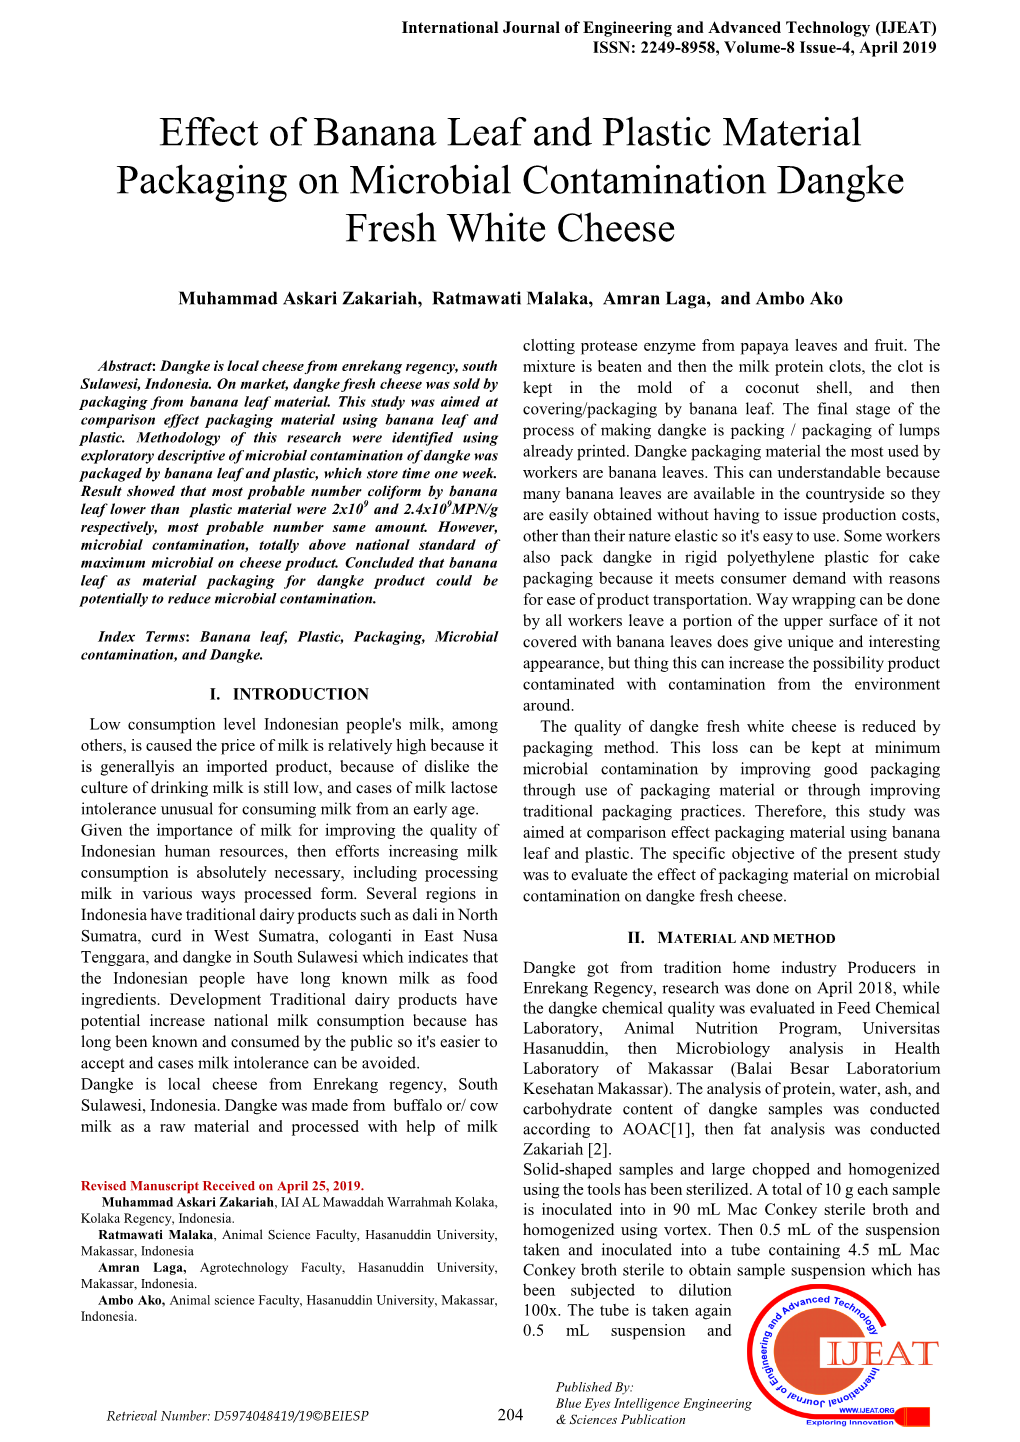 Effect of Banana Leaf and Plastic Material Packaging on Microbial Contamination Dangke Fresh White Cheese